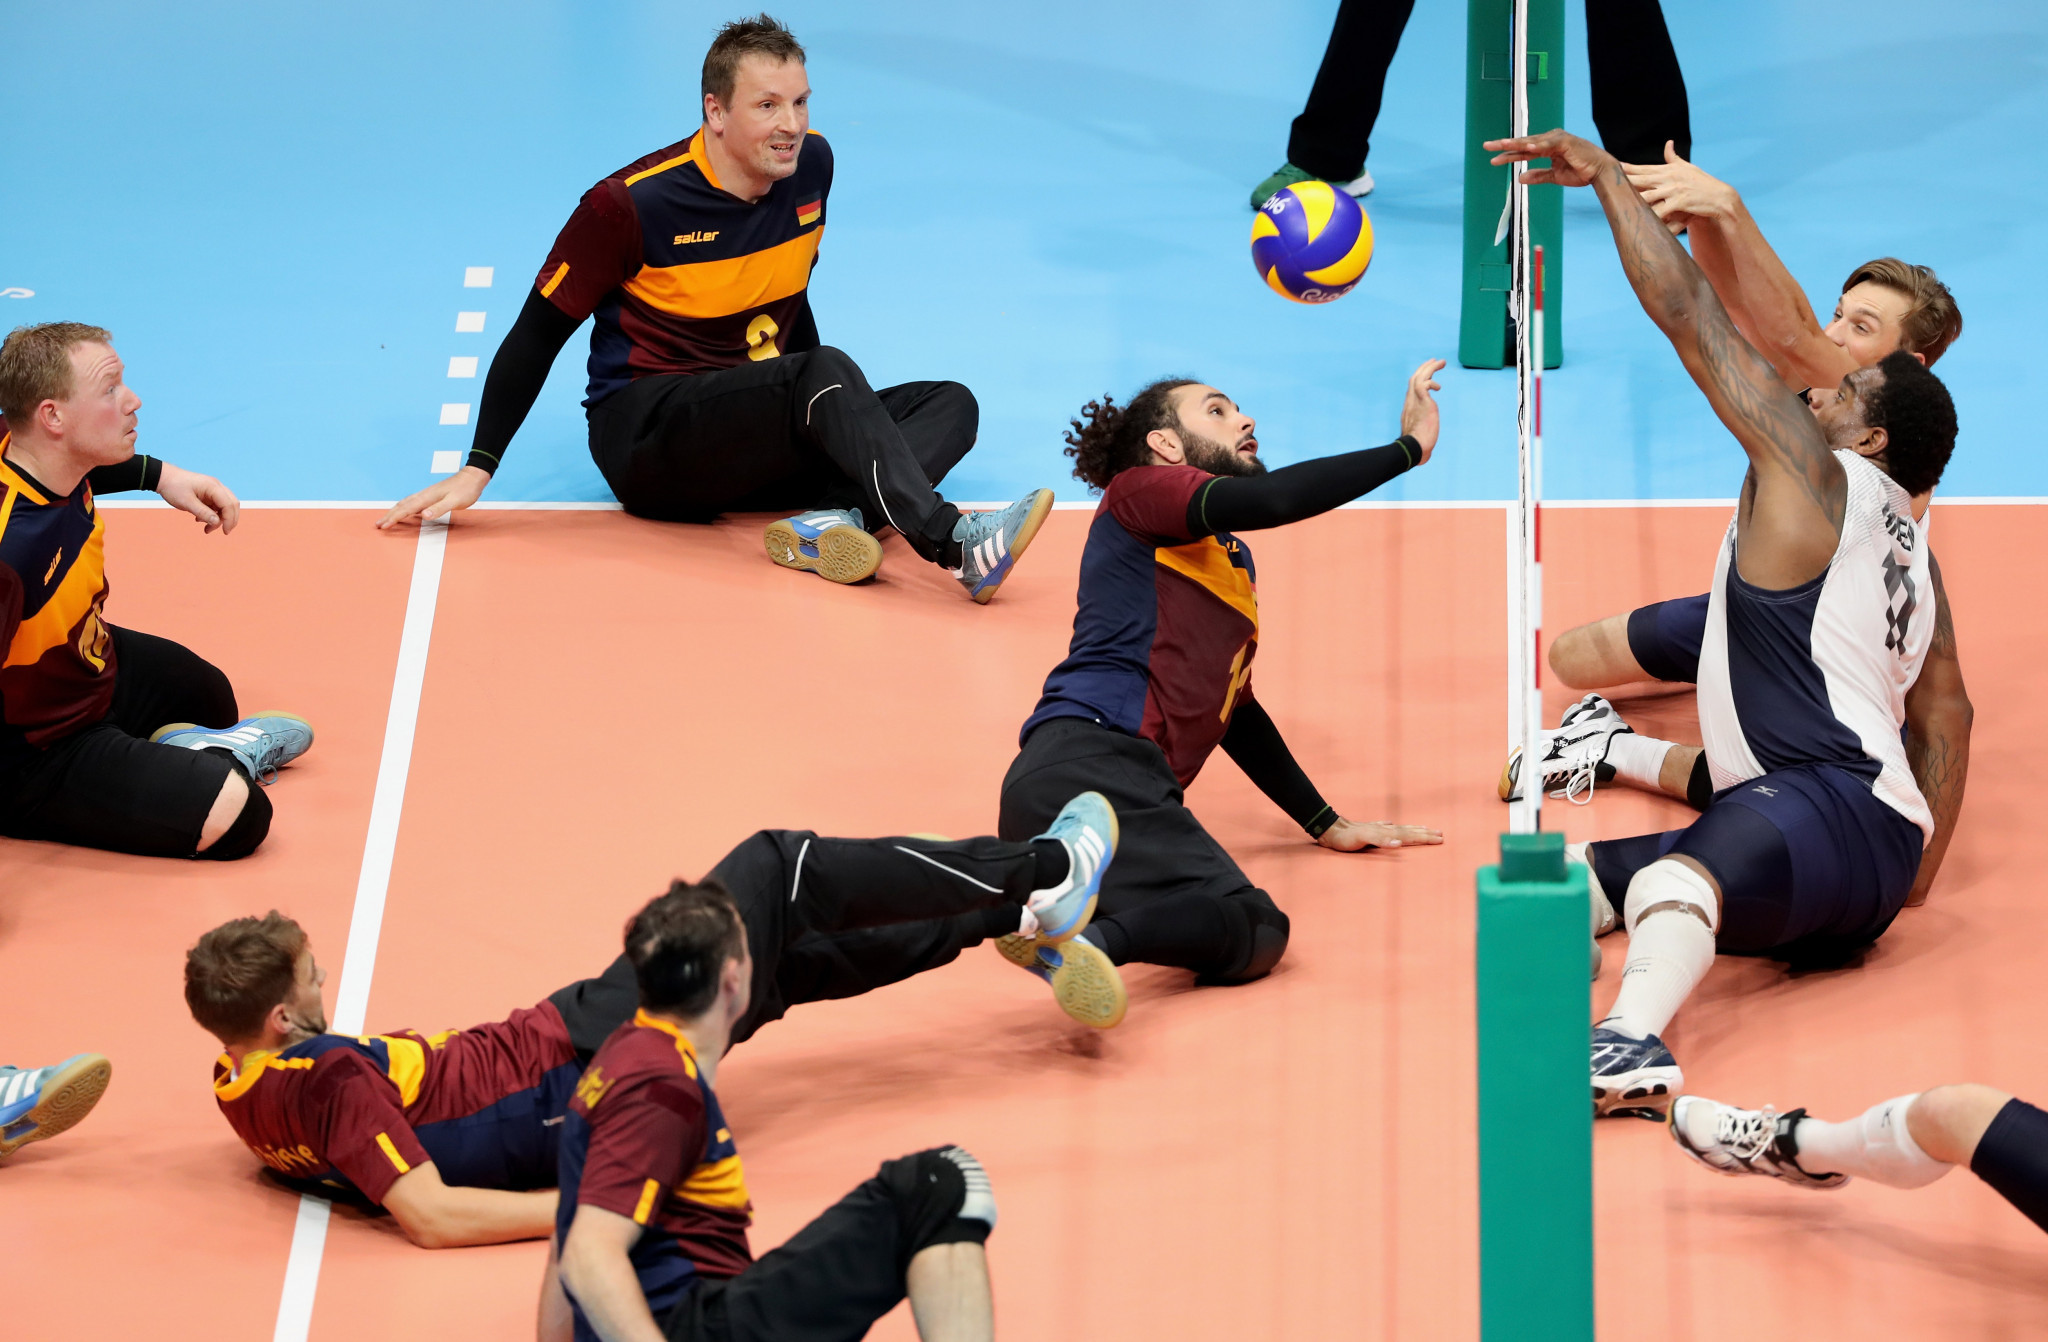 Germany will now host the final men's sitting volleyball qualifier for Tokyo 2020 ©Getty Images